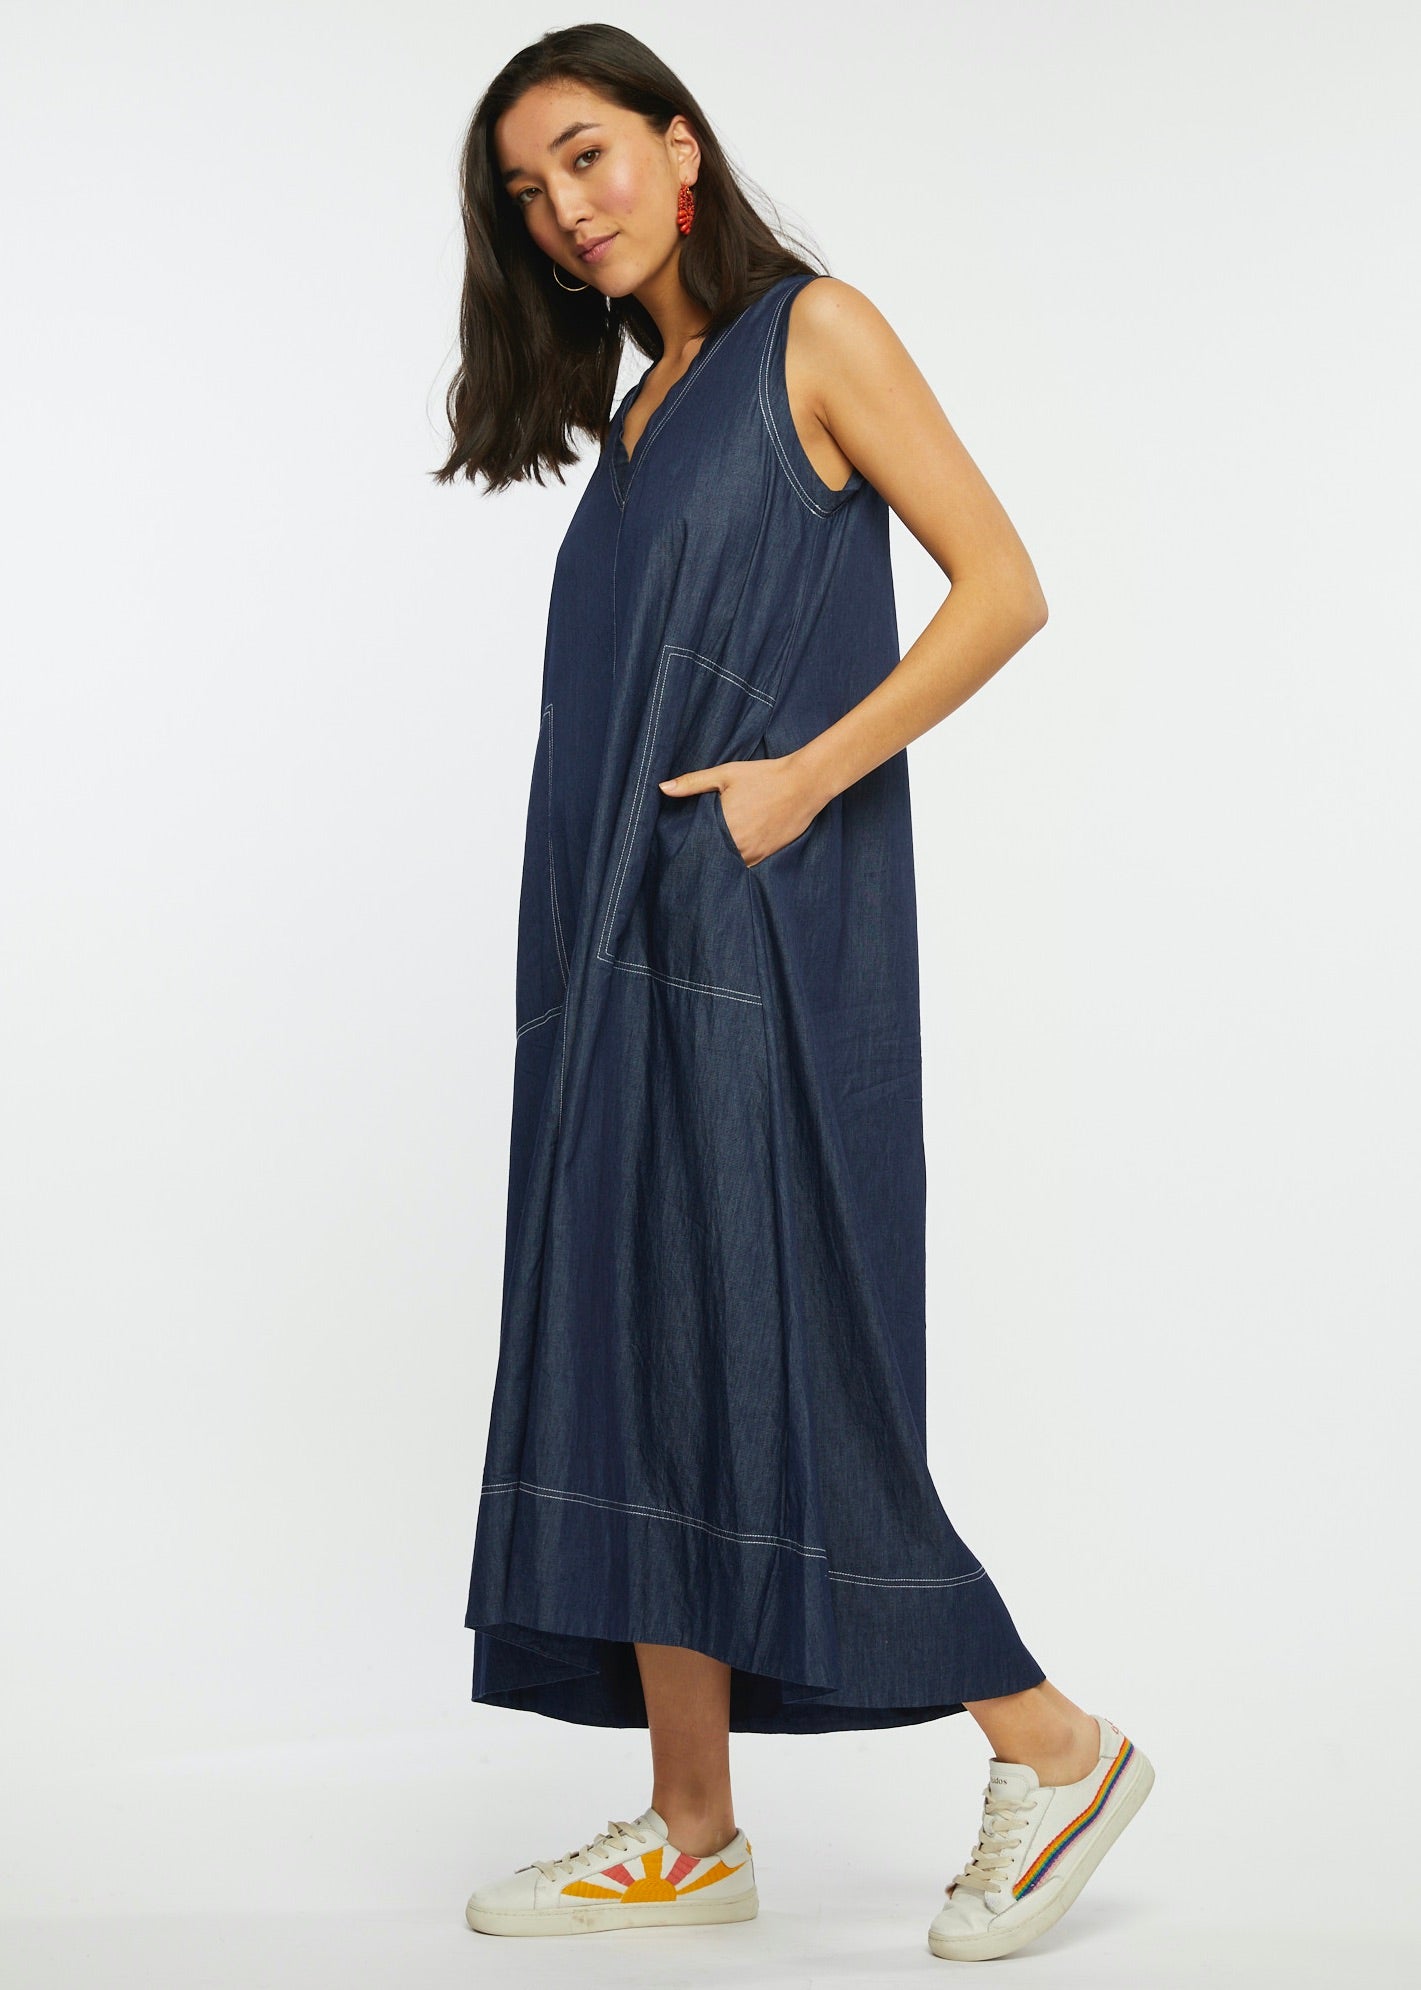 Denim Dress by Zaket and Plover